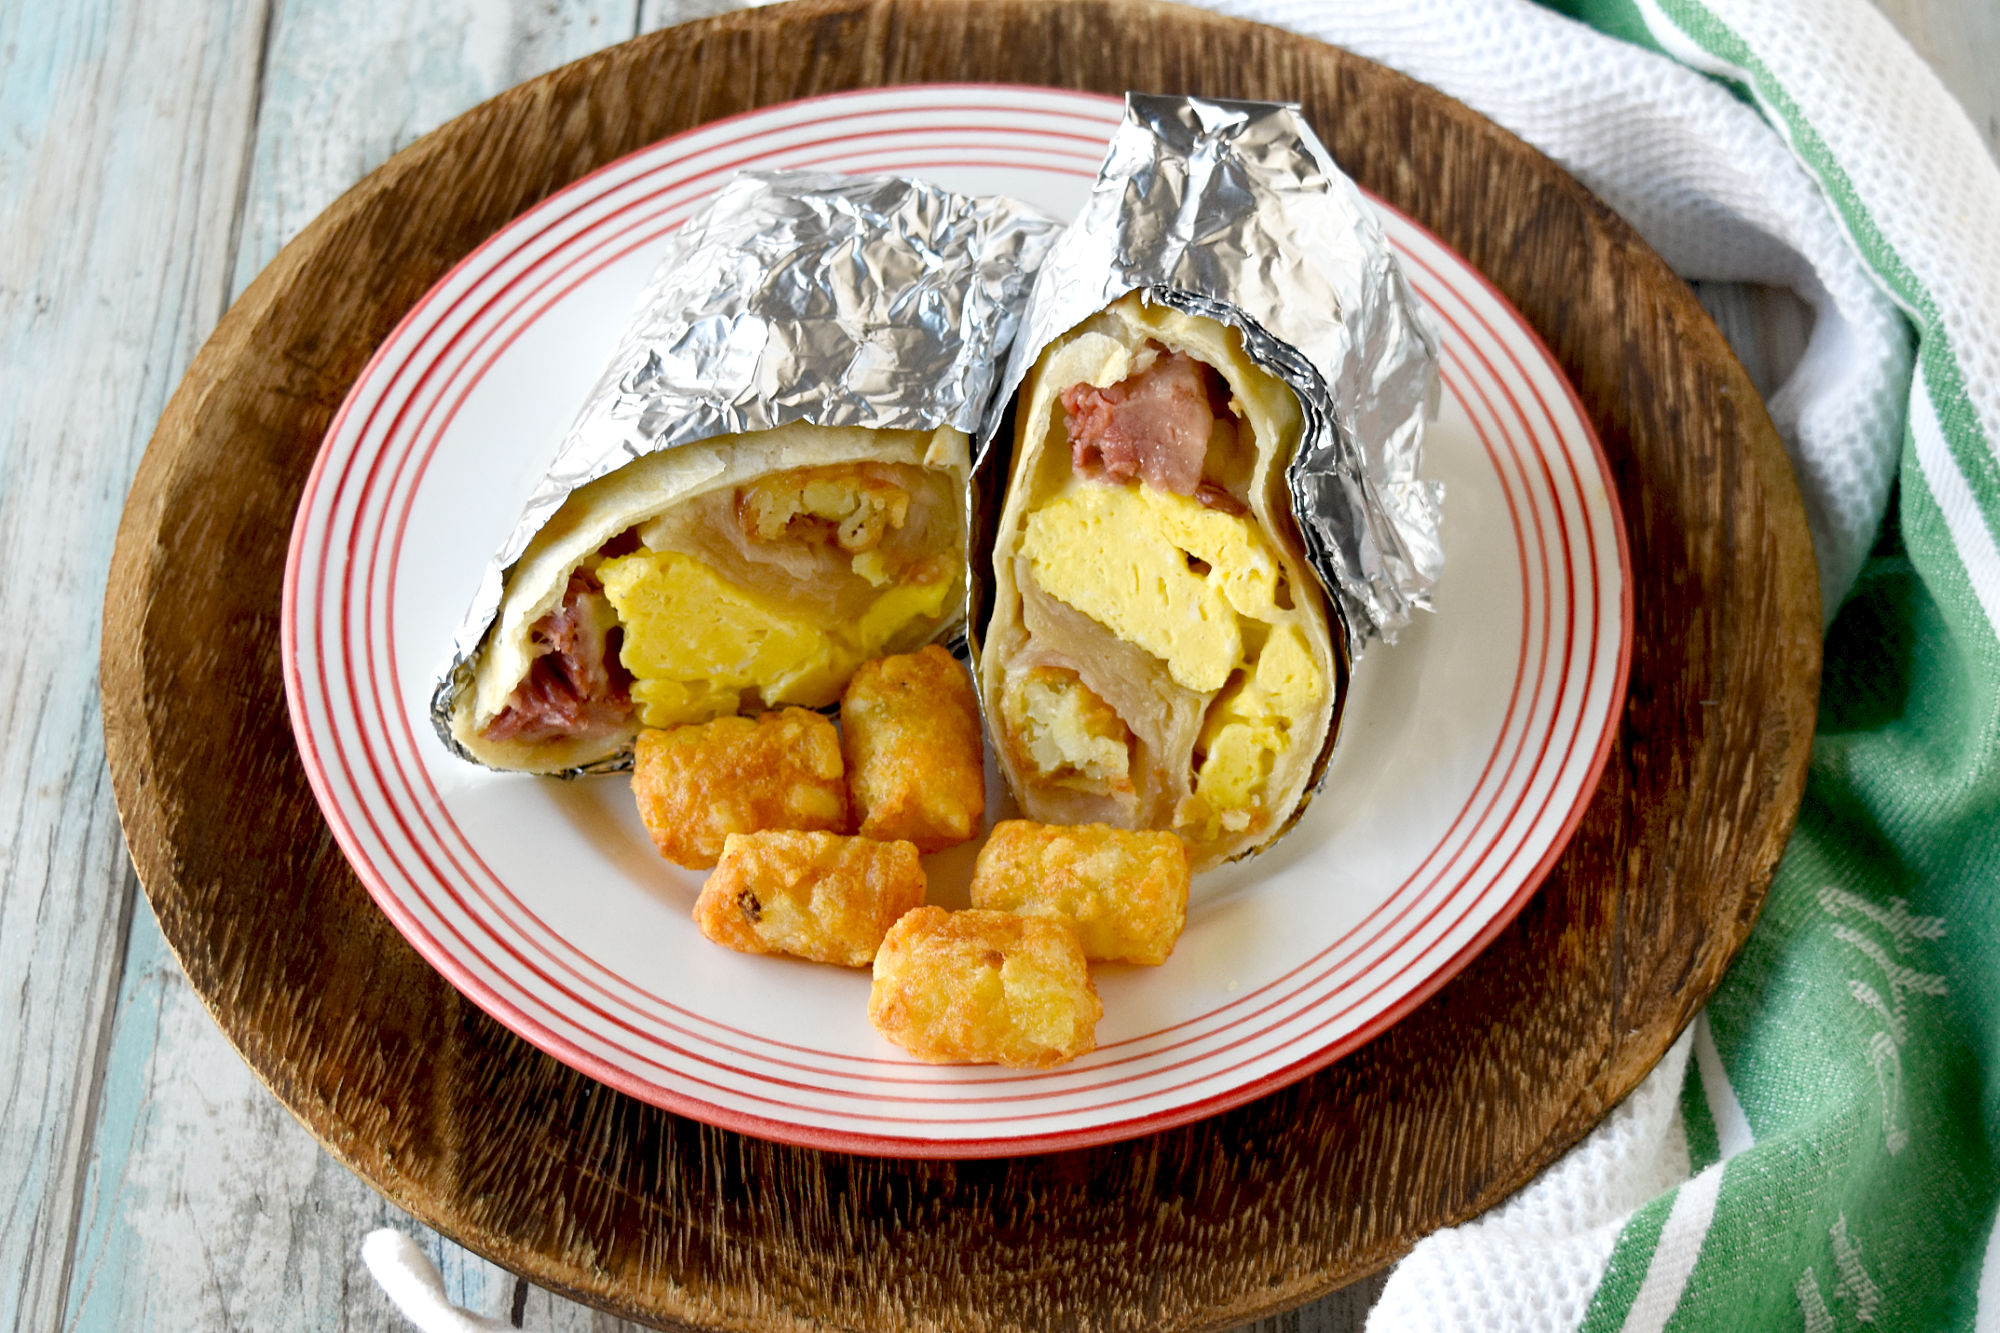 Easy Freezer Breakfast Burritos whip up in no time, are hearty and filling, and you can easily change up the ingredients to match your taste. They’re a perfect grab and go breakfast for work!  #OurFamilyTable #breakfast #brunch #freezermeal #freezerburrito